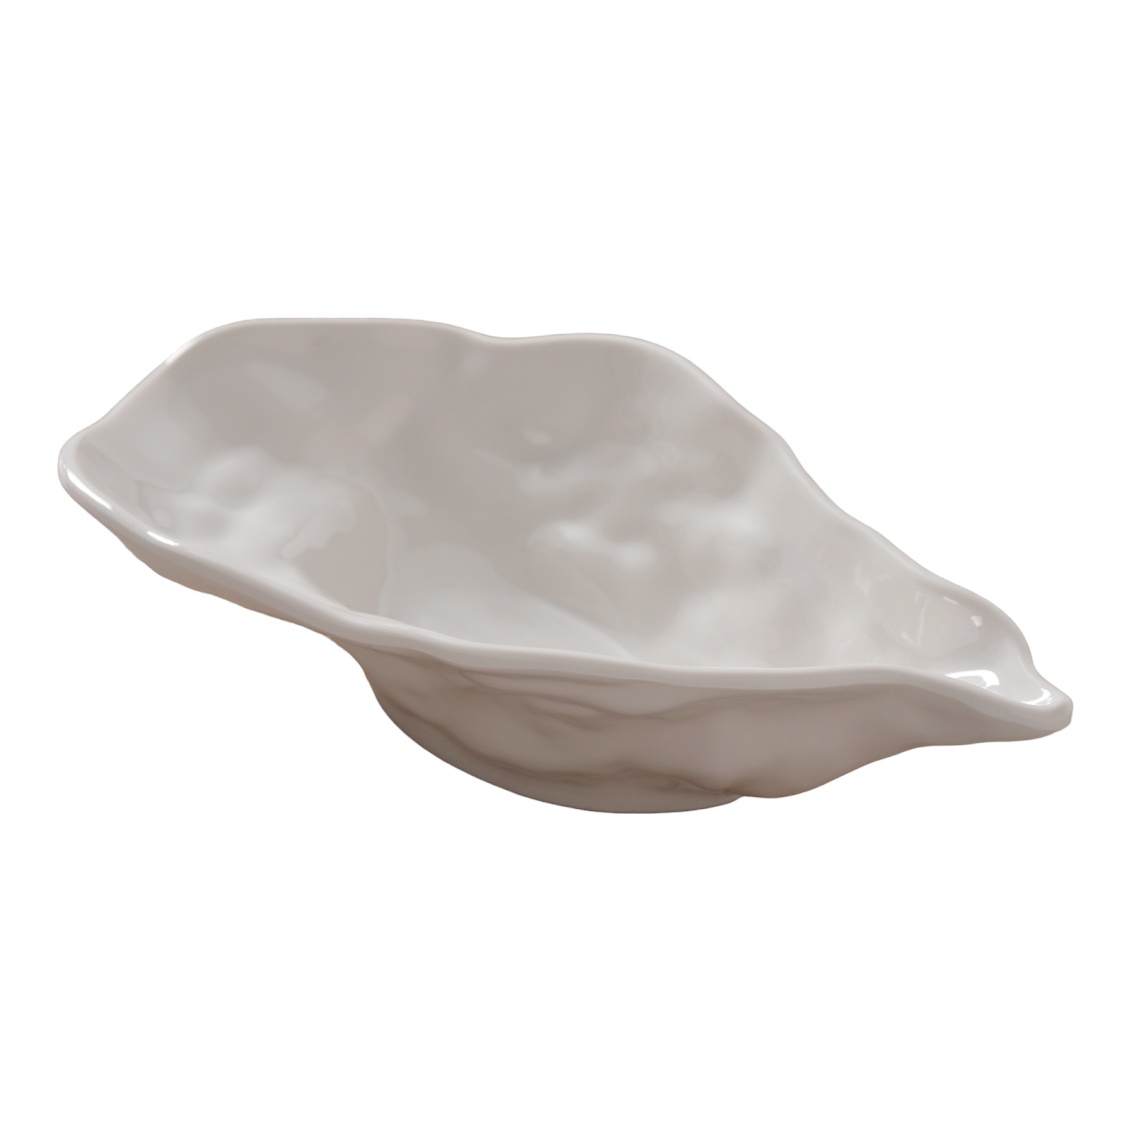 Large Oyster Bowl